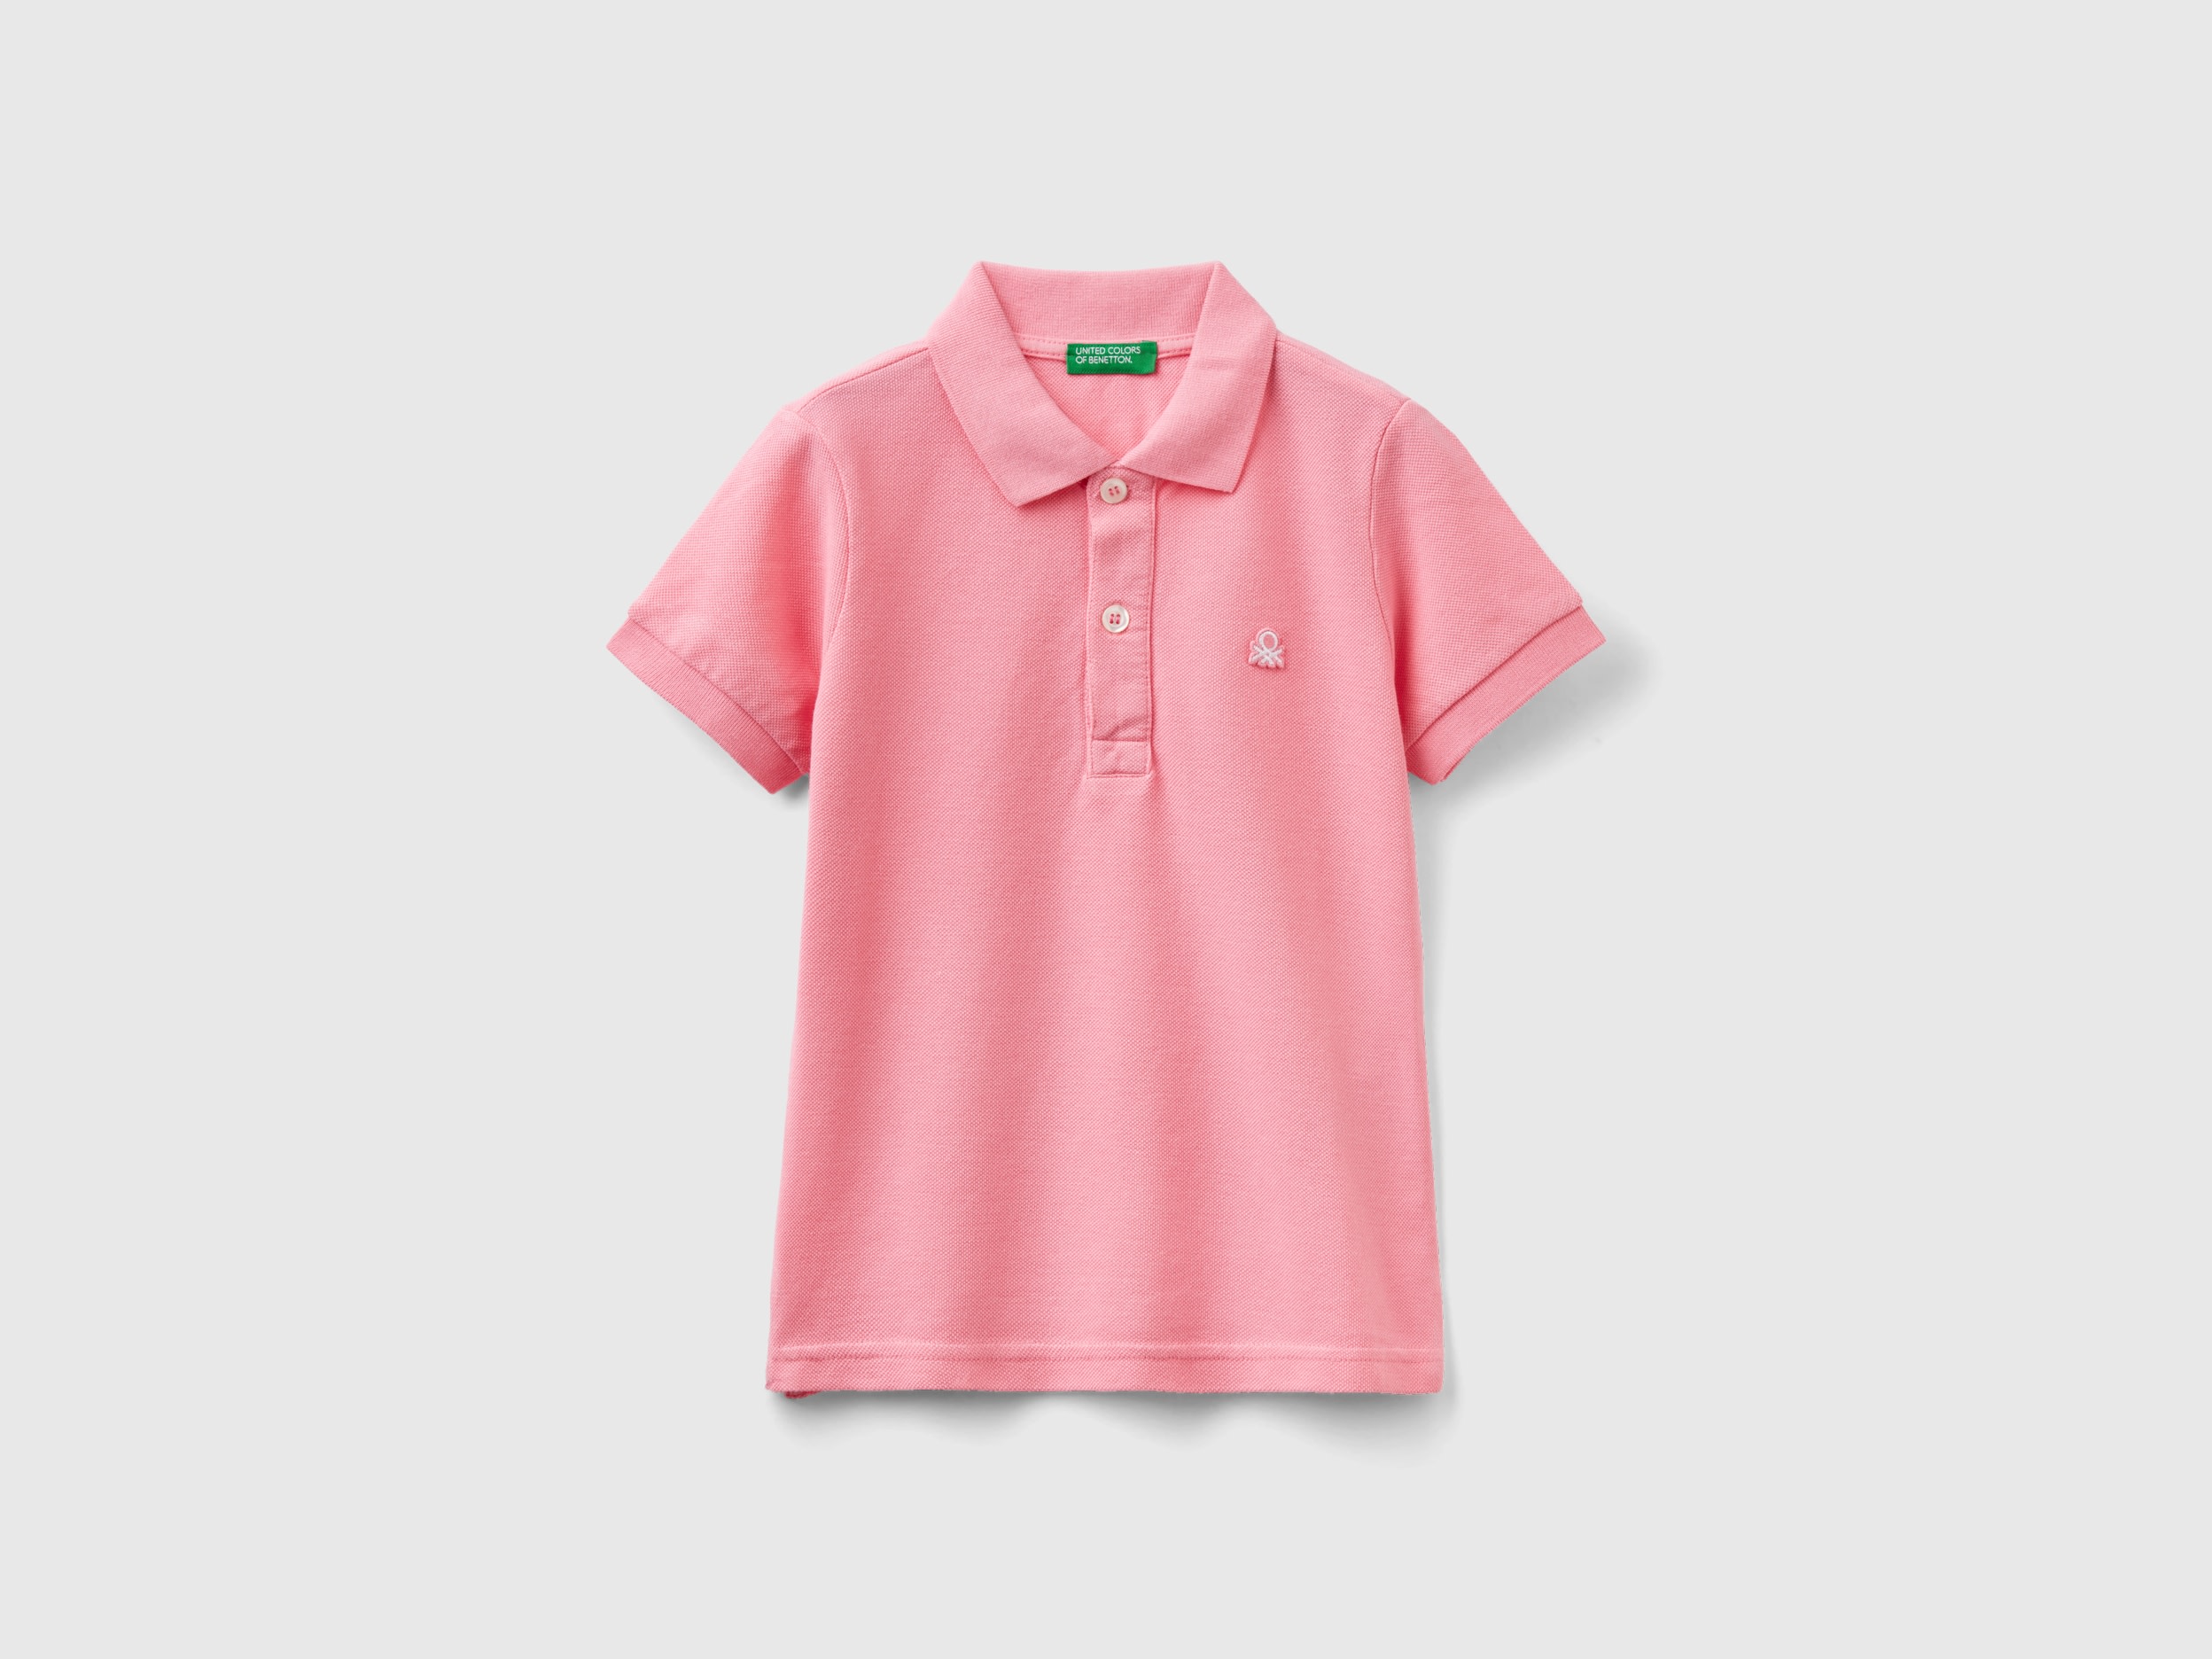 Benetton, Short Sleeve Polo In Organic Cotton, size 4-5, Pink, Kids